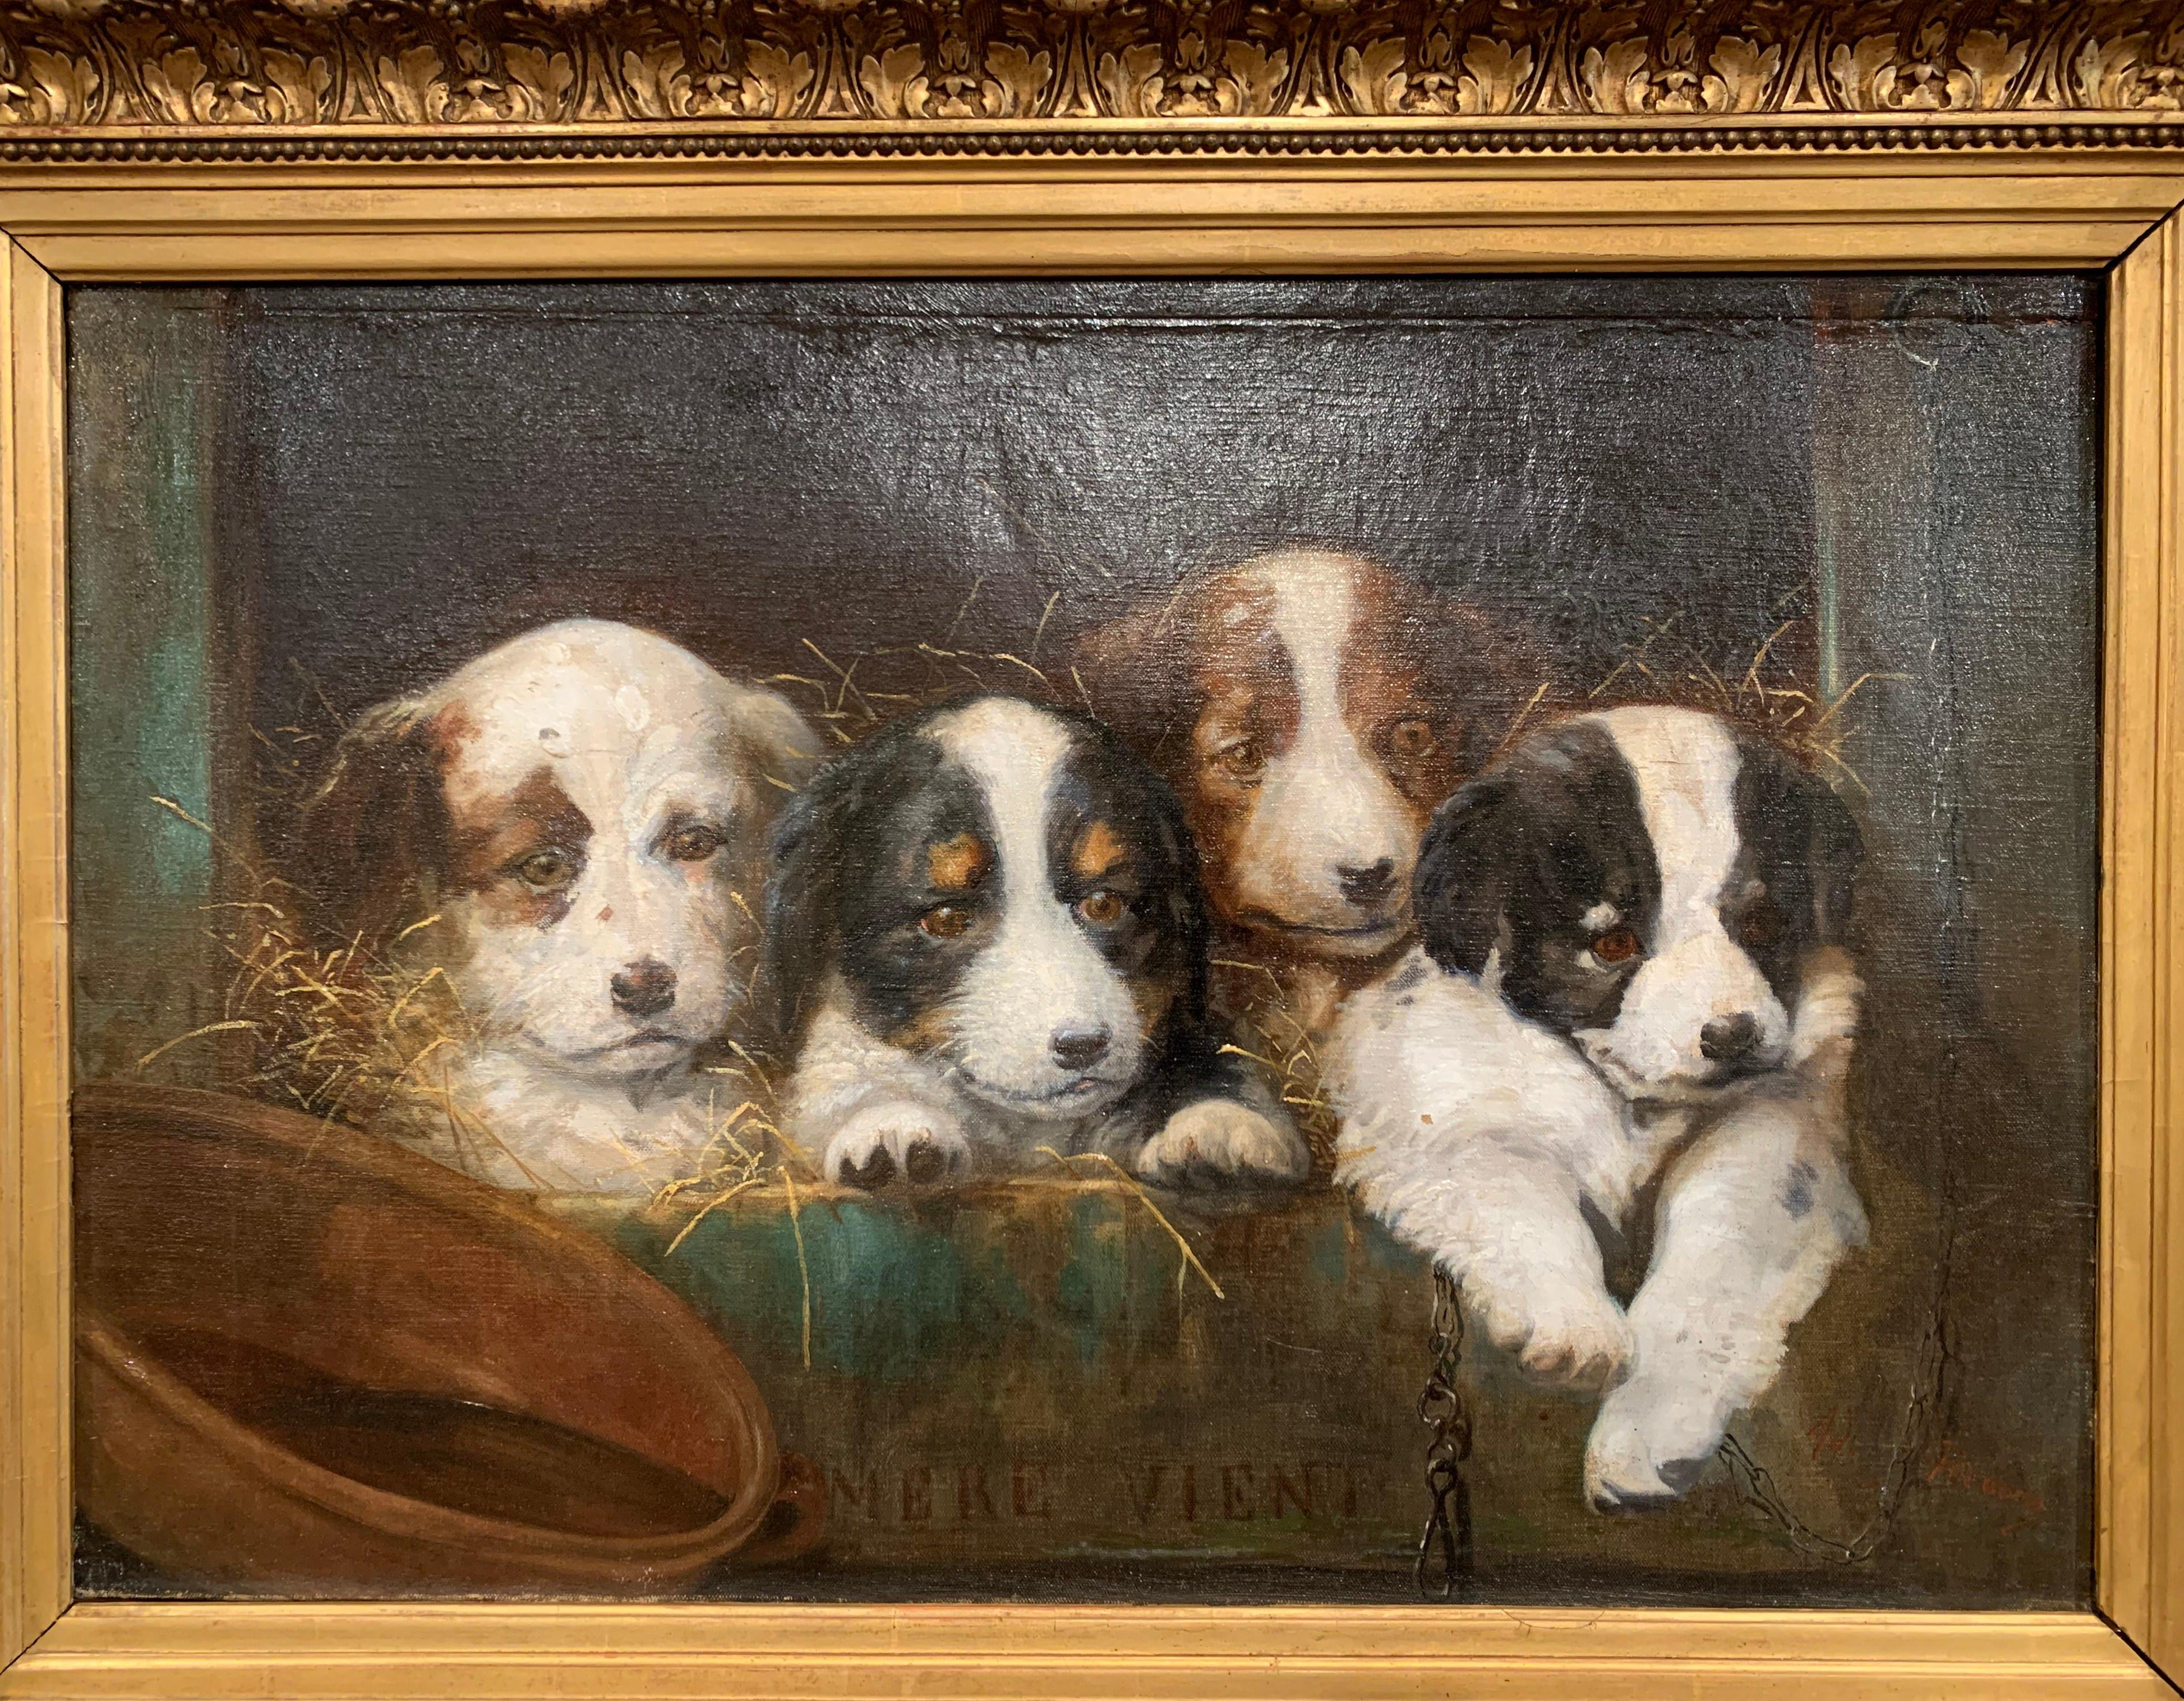 This antique oil on canvas painting was created in France circa 1850, set in the original carved gilt wood frame and titled 